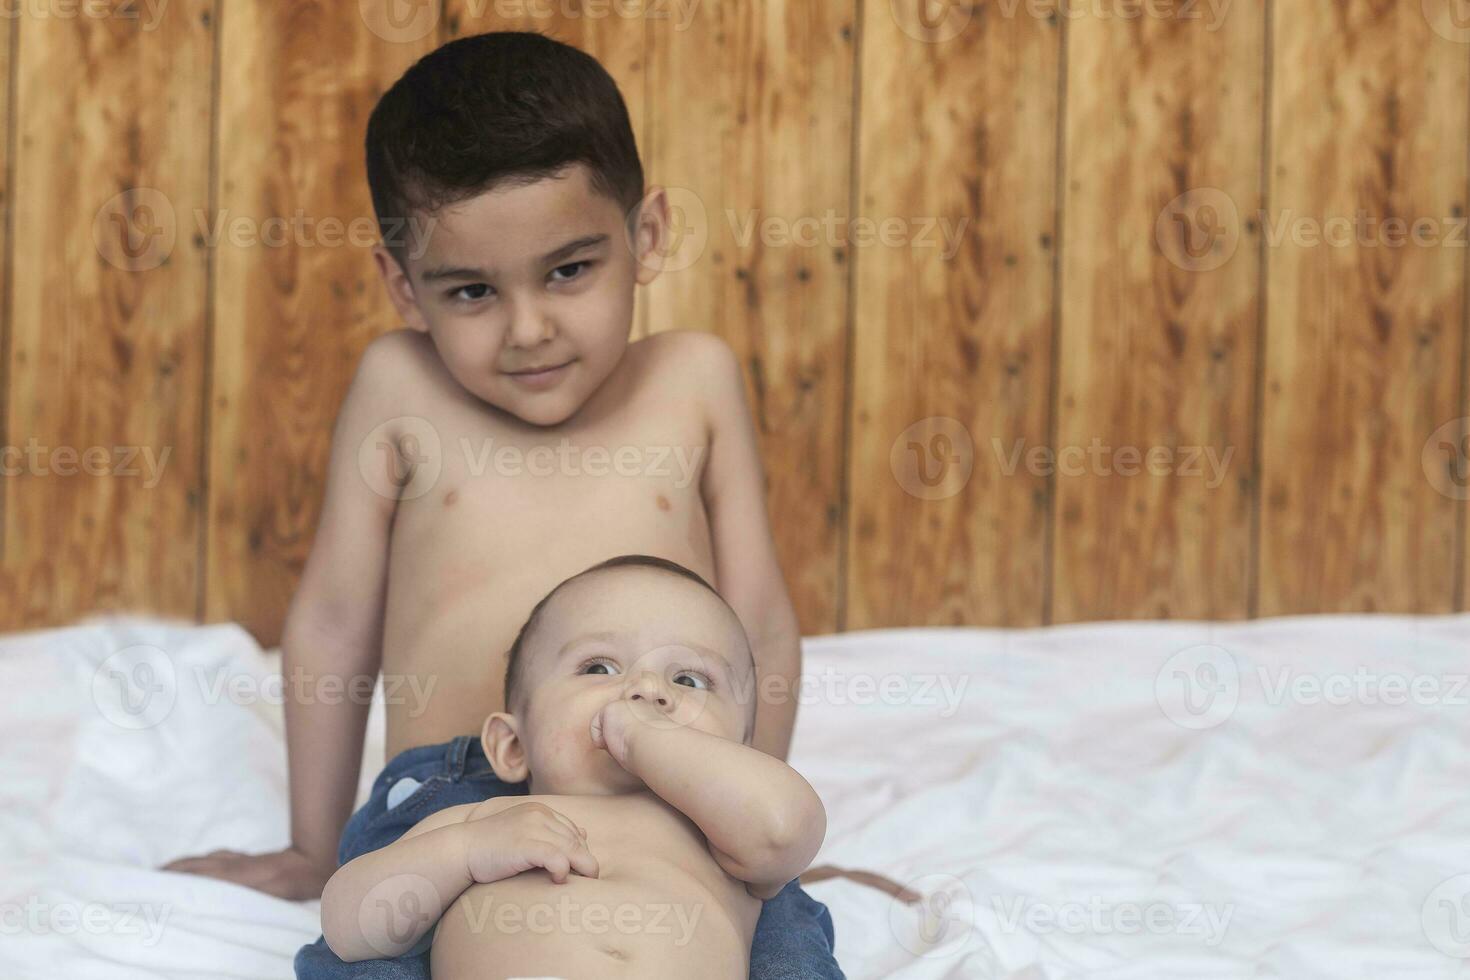 Happy childhood concept. Happy brothers portrait. 6 years and 6 months old boys having fun. Two little kids smiling having good time. Cute little brothers lying and playing together photo